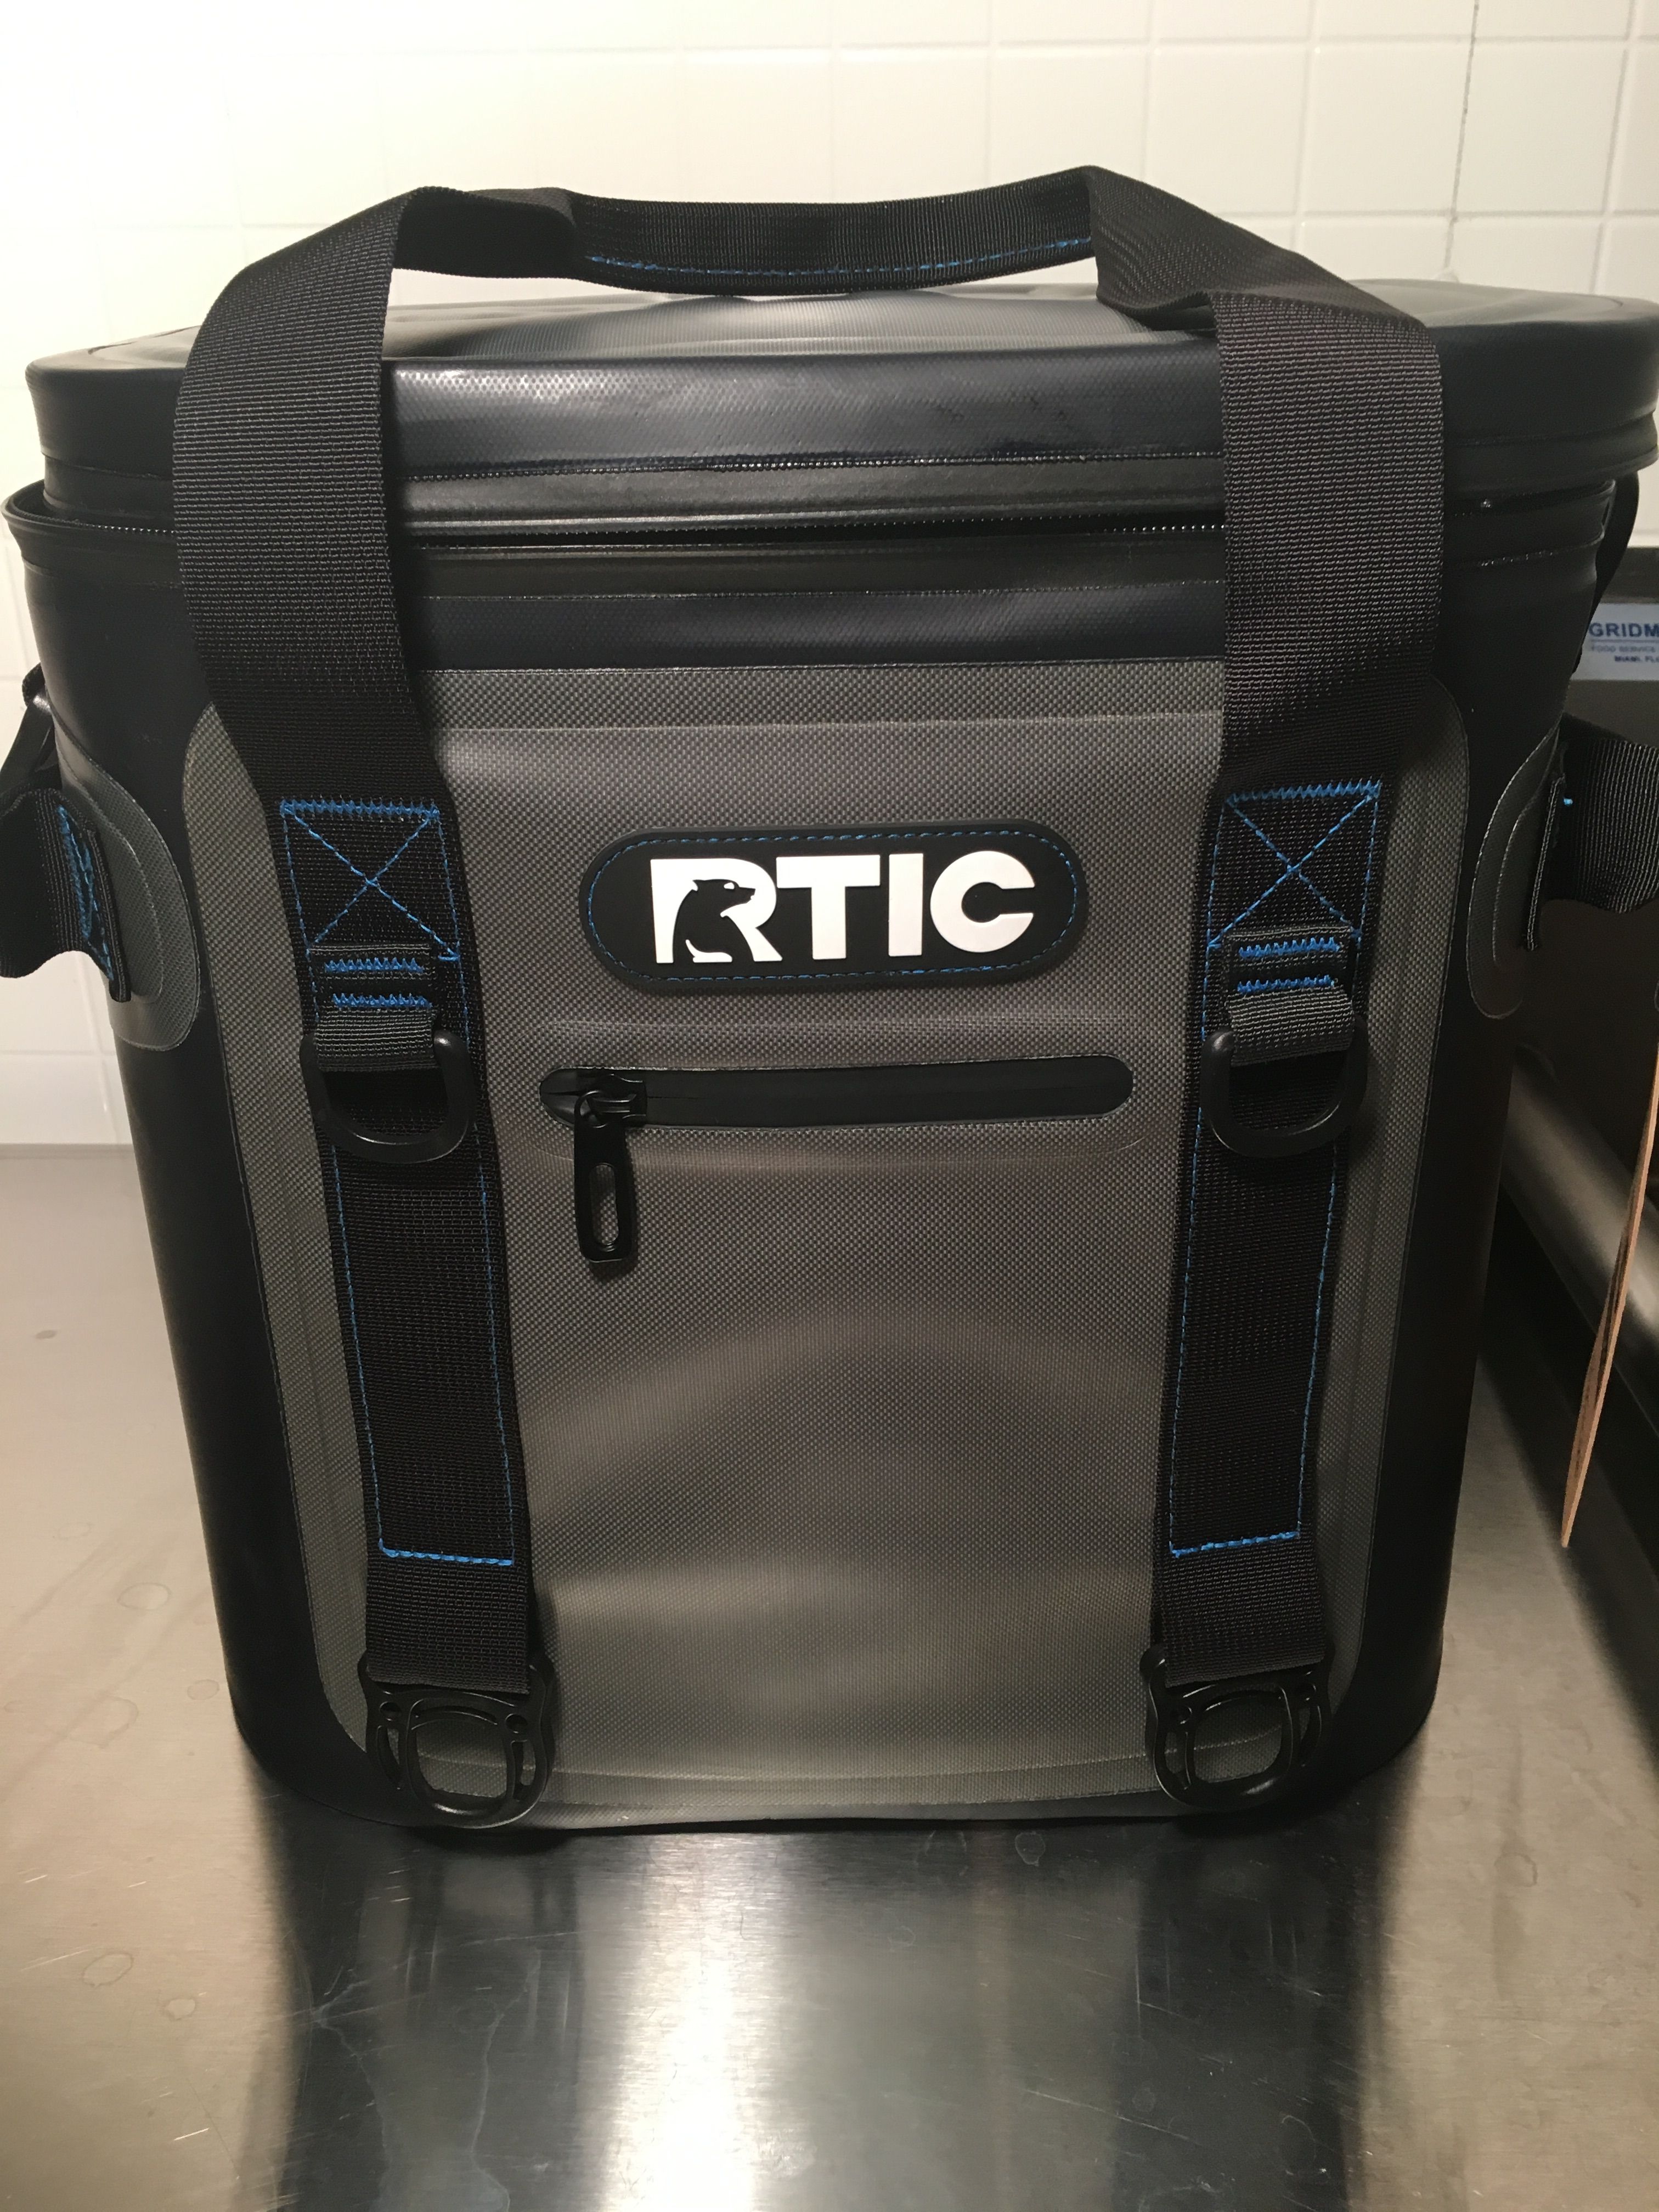 RTIC Soft Pack 20 Cooler